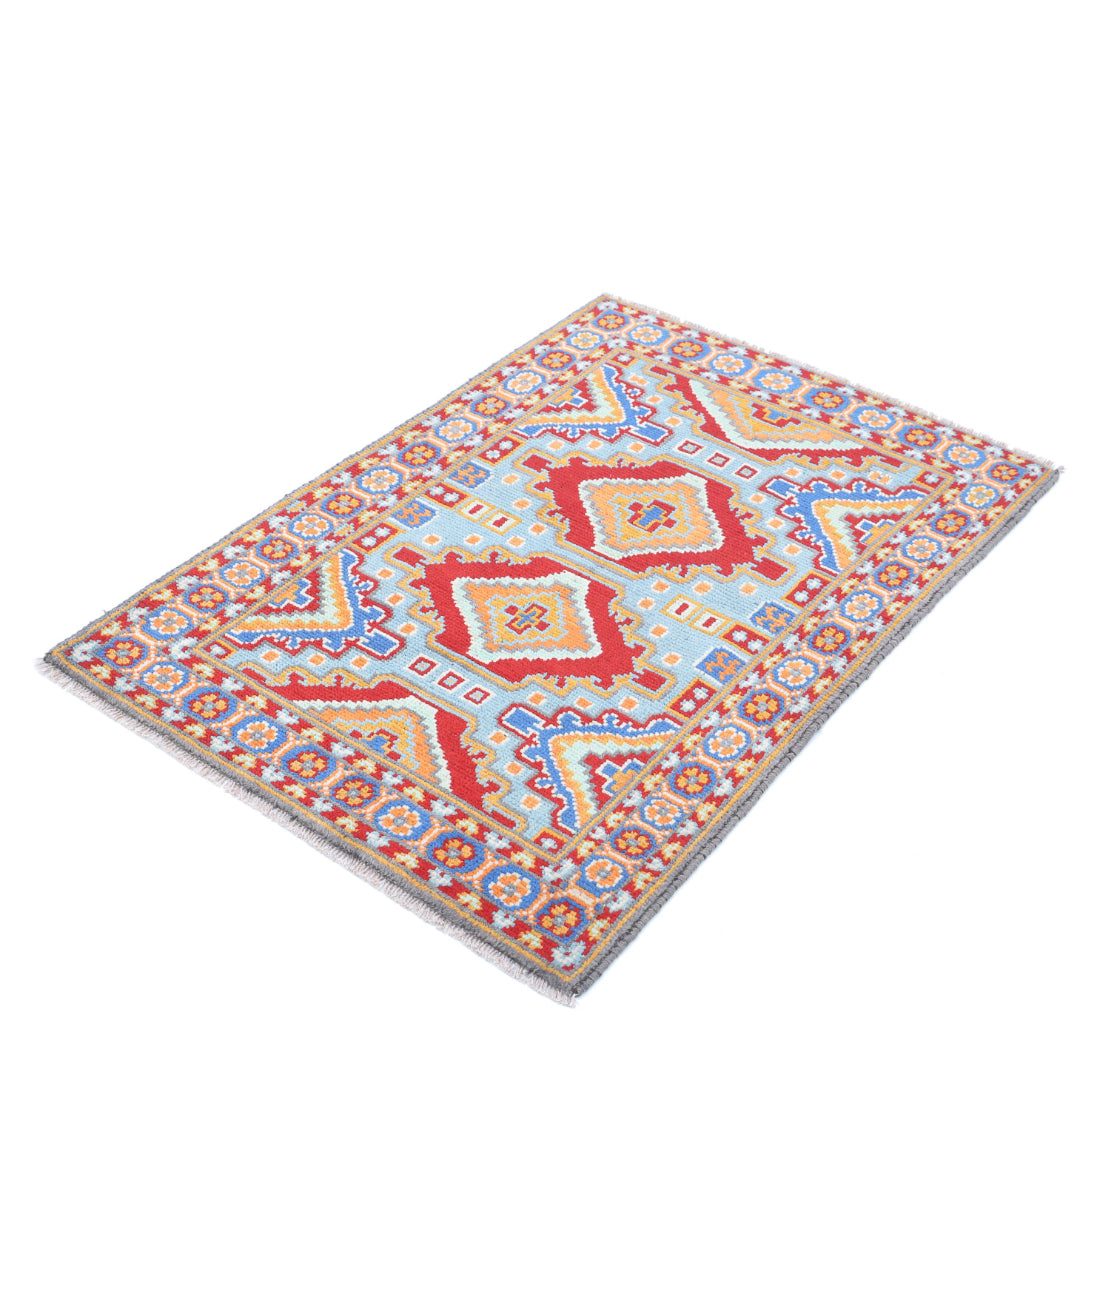 Revival 2'8'' X 3'11'' Hand-Knotted Wool Rug 2'8'' x 3'11'' (80 X 118) / Blue / Red